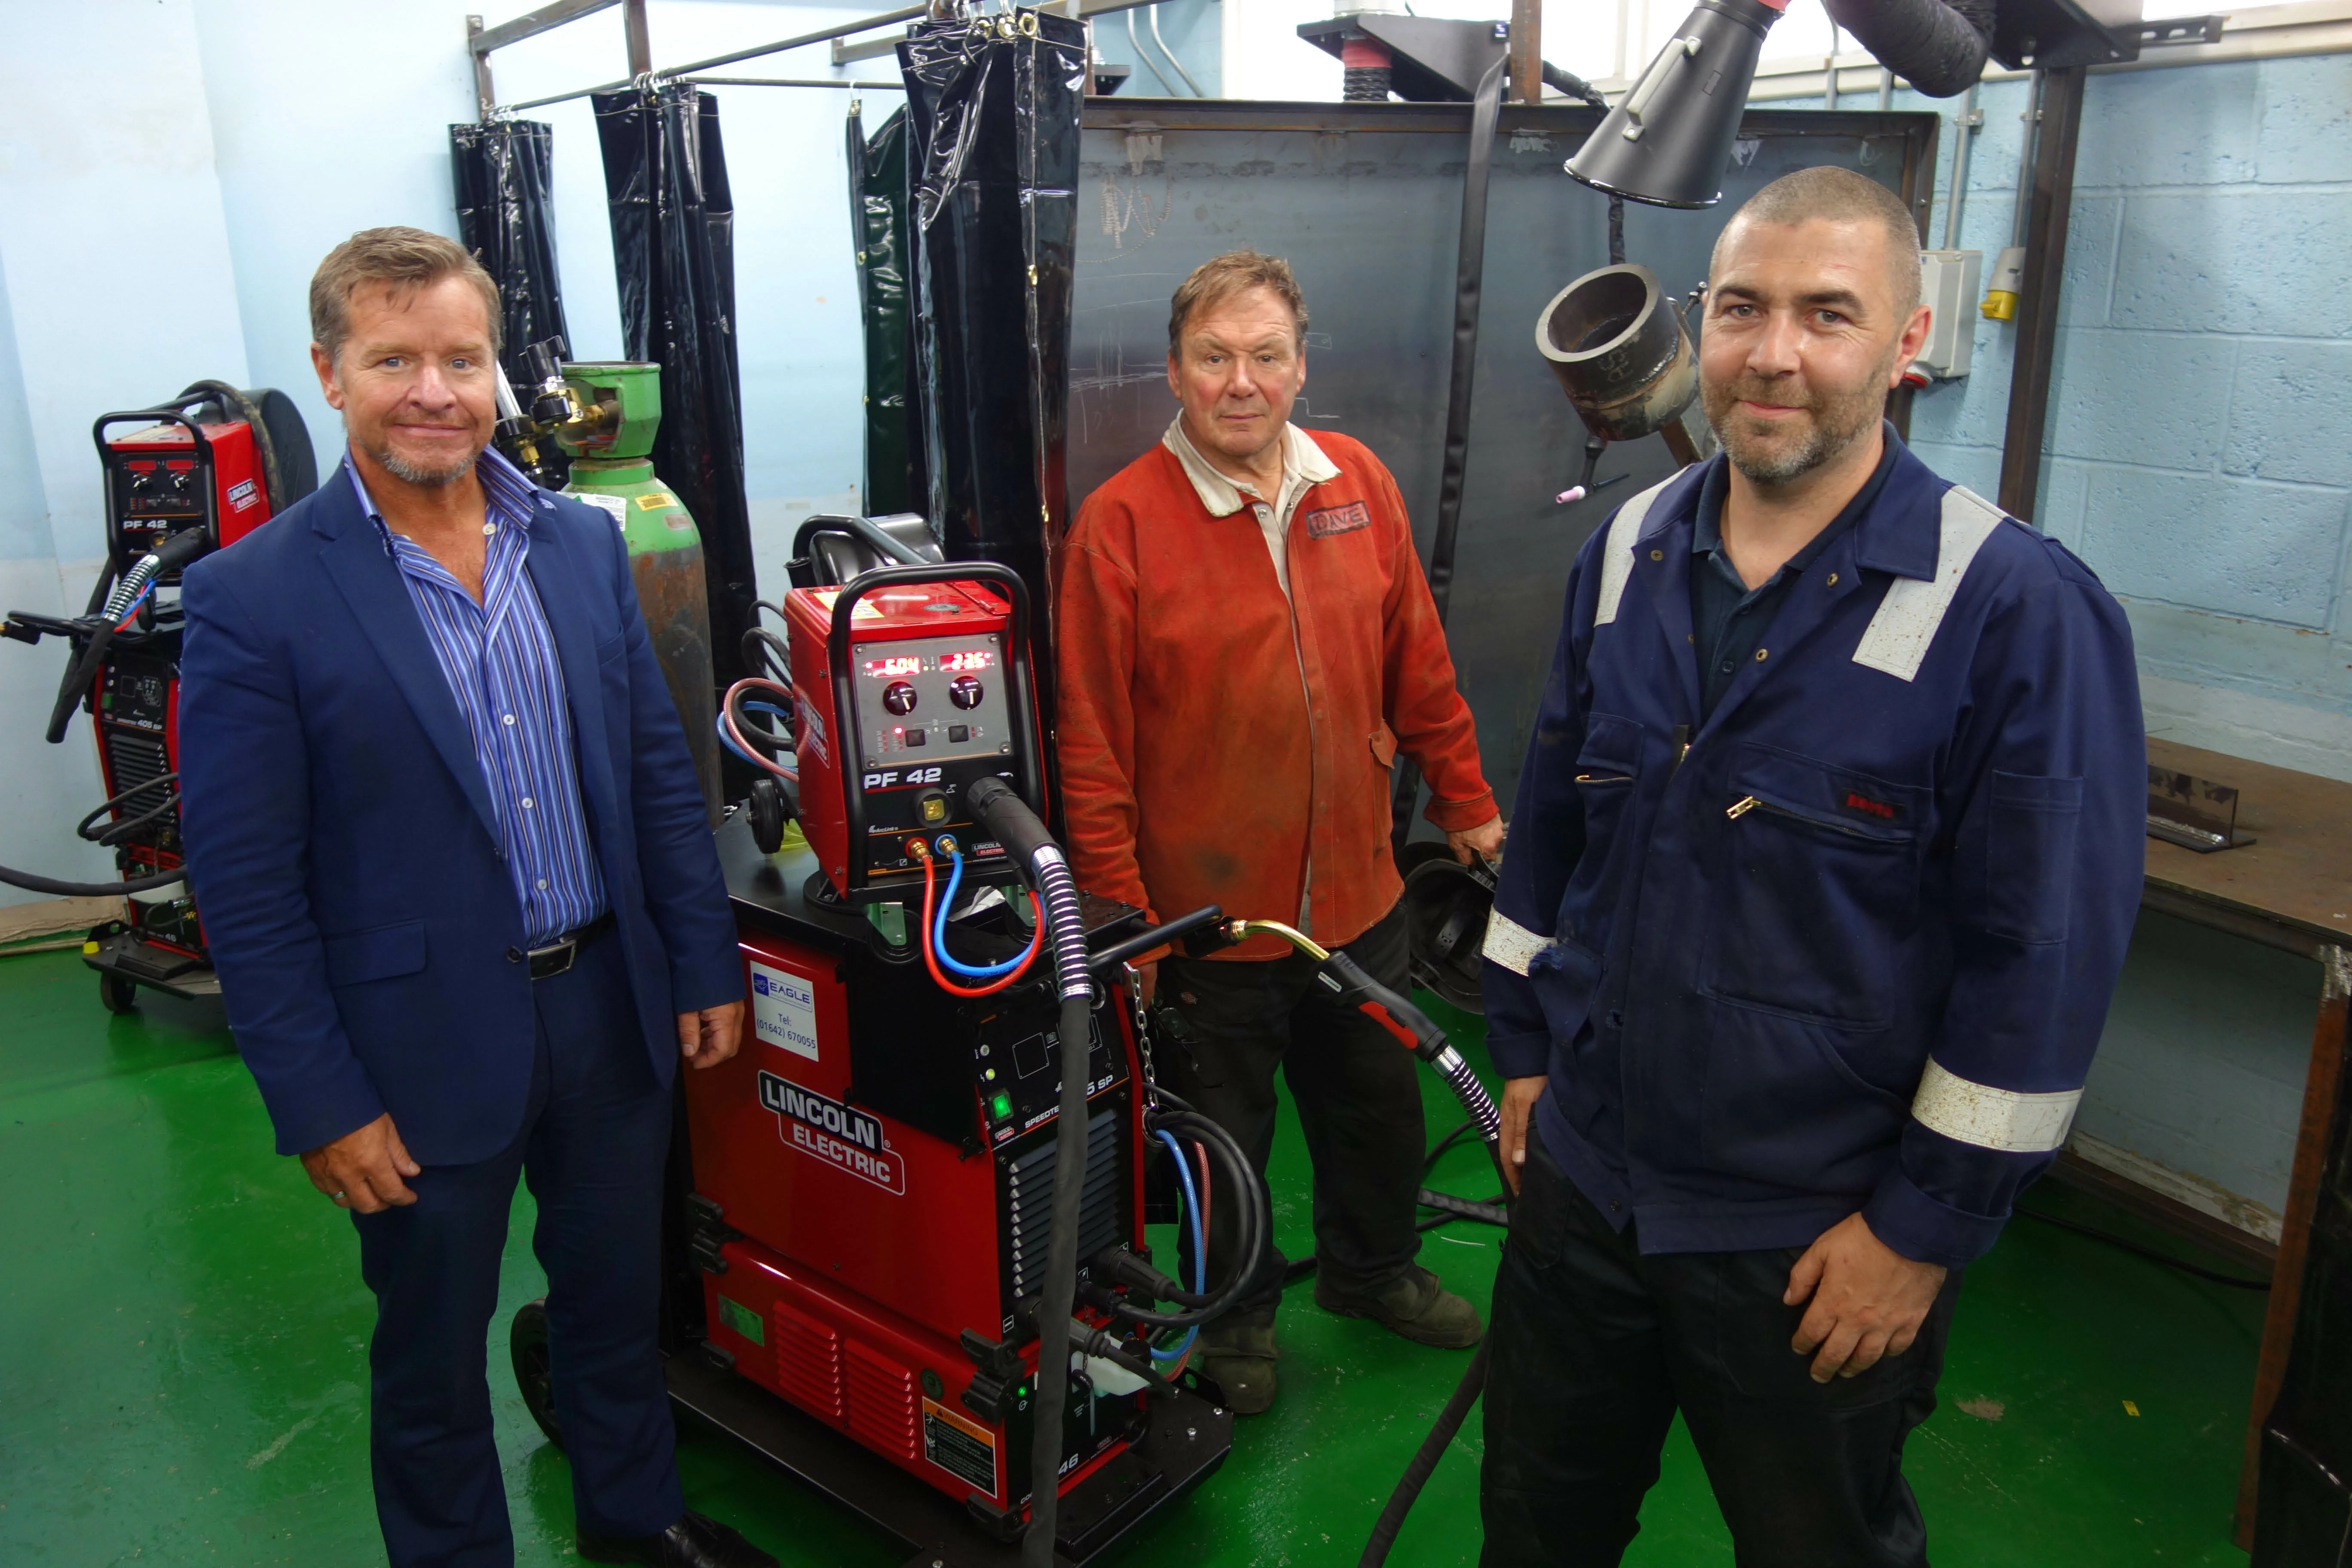 NETA Commercial Training Manager Graham Middleditch, welding instructor Dave Stephenson and Commercial Engineering Co-ordinator Iain Taylor